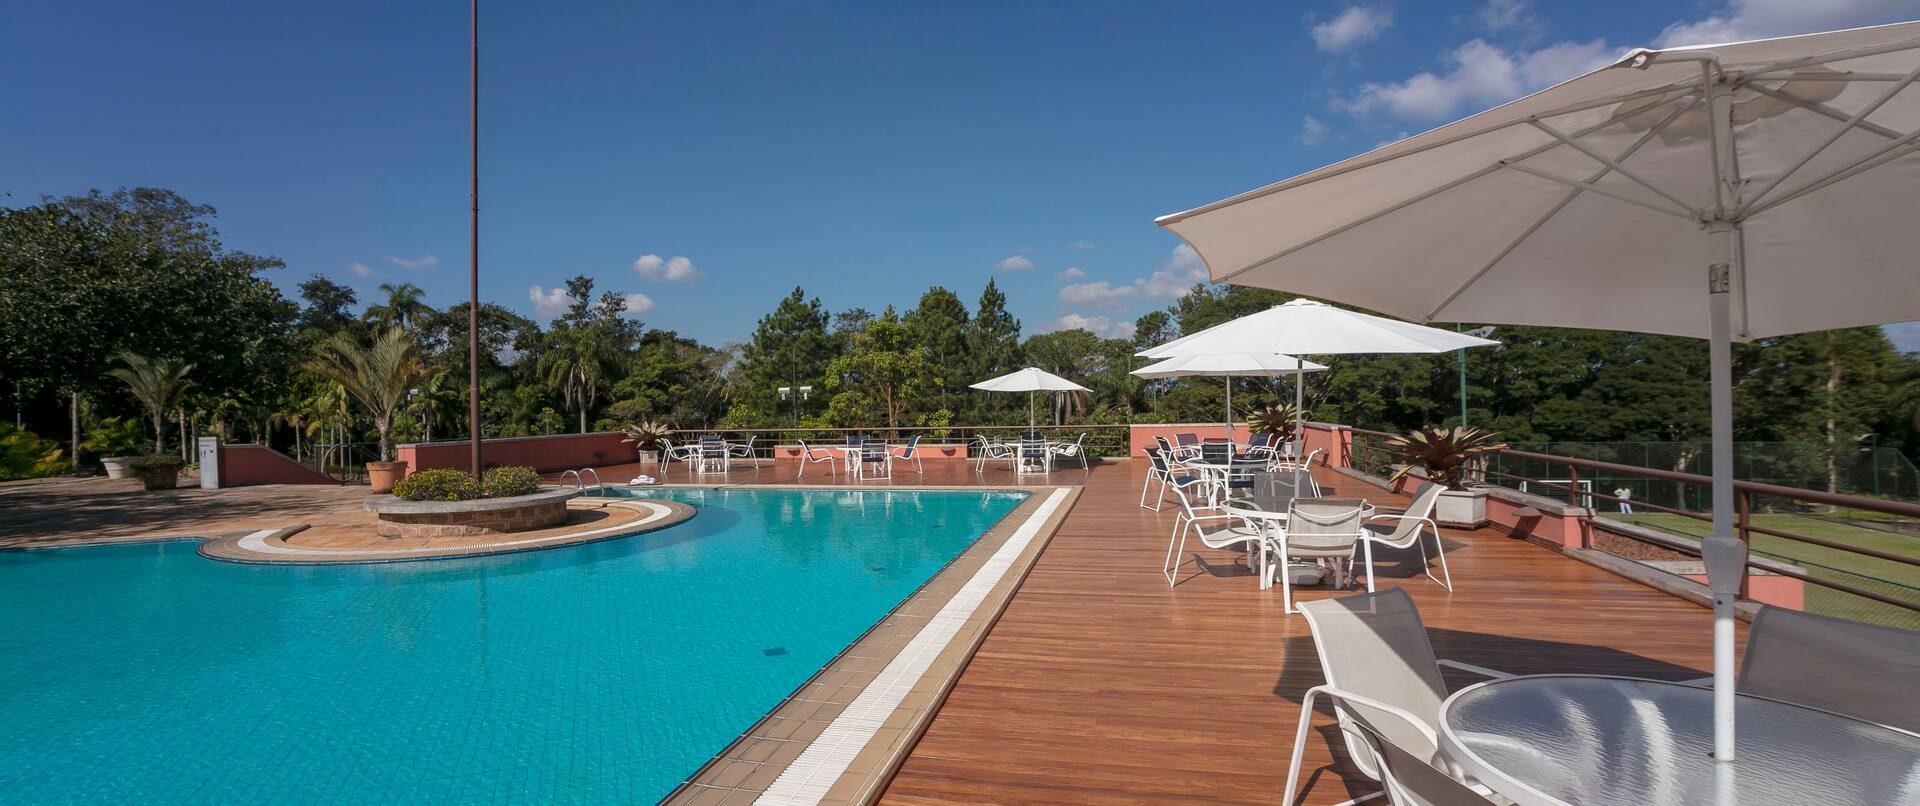 Outdoor Pool Area with Tables and Chairs under Umbrellas